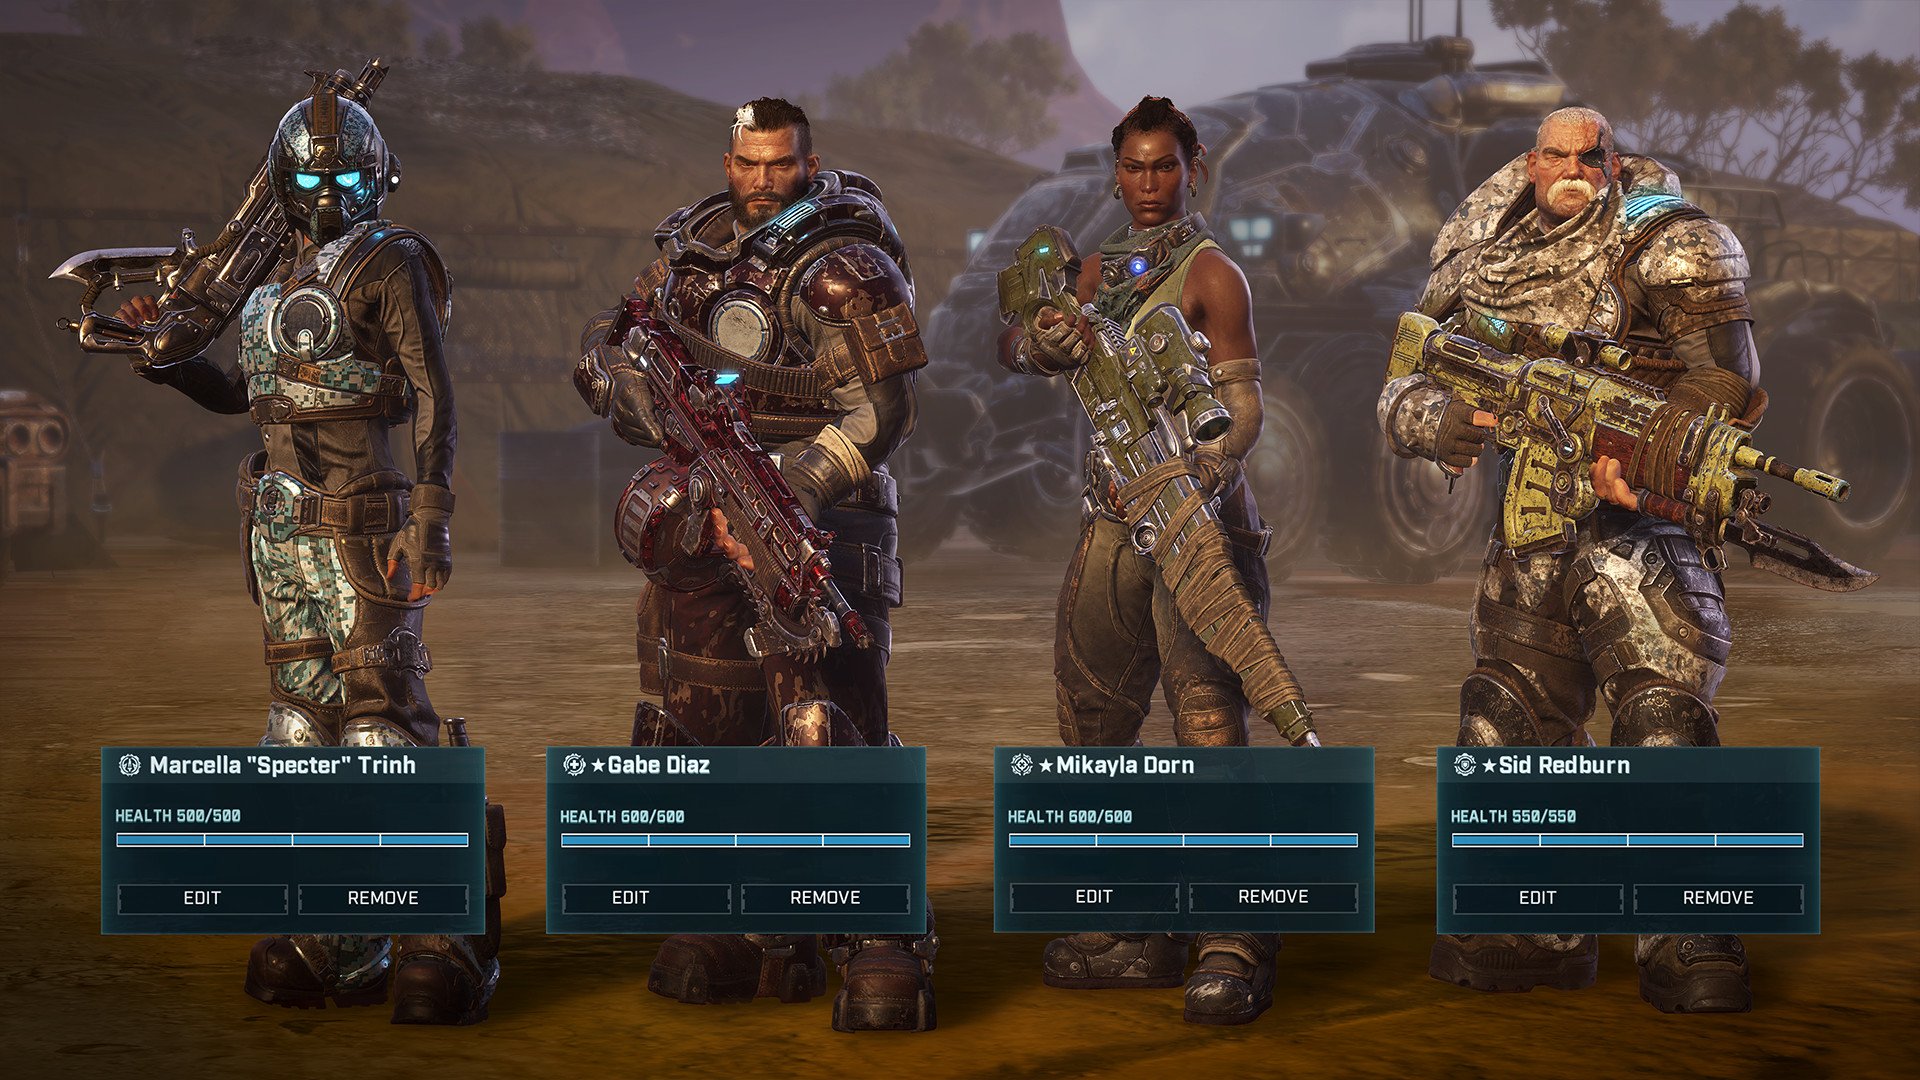  How to upgrade weapons and armor in Gears Tactics 